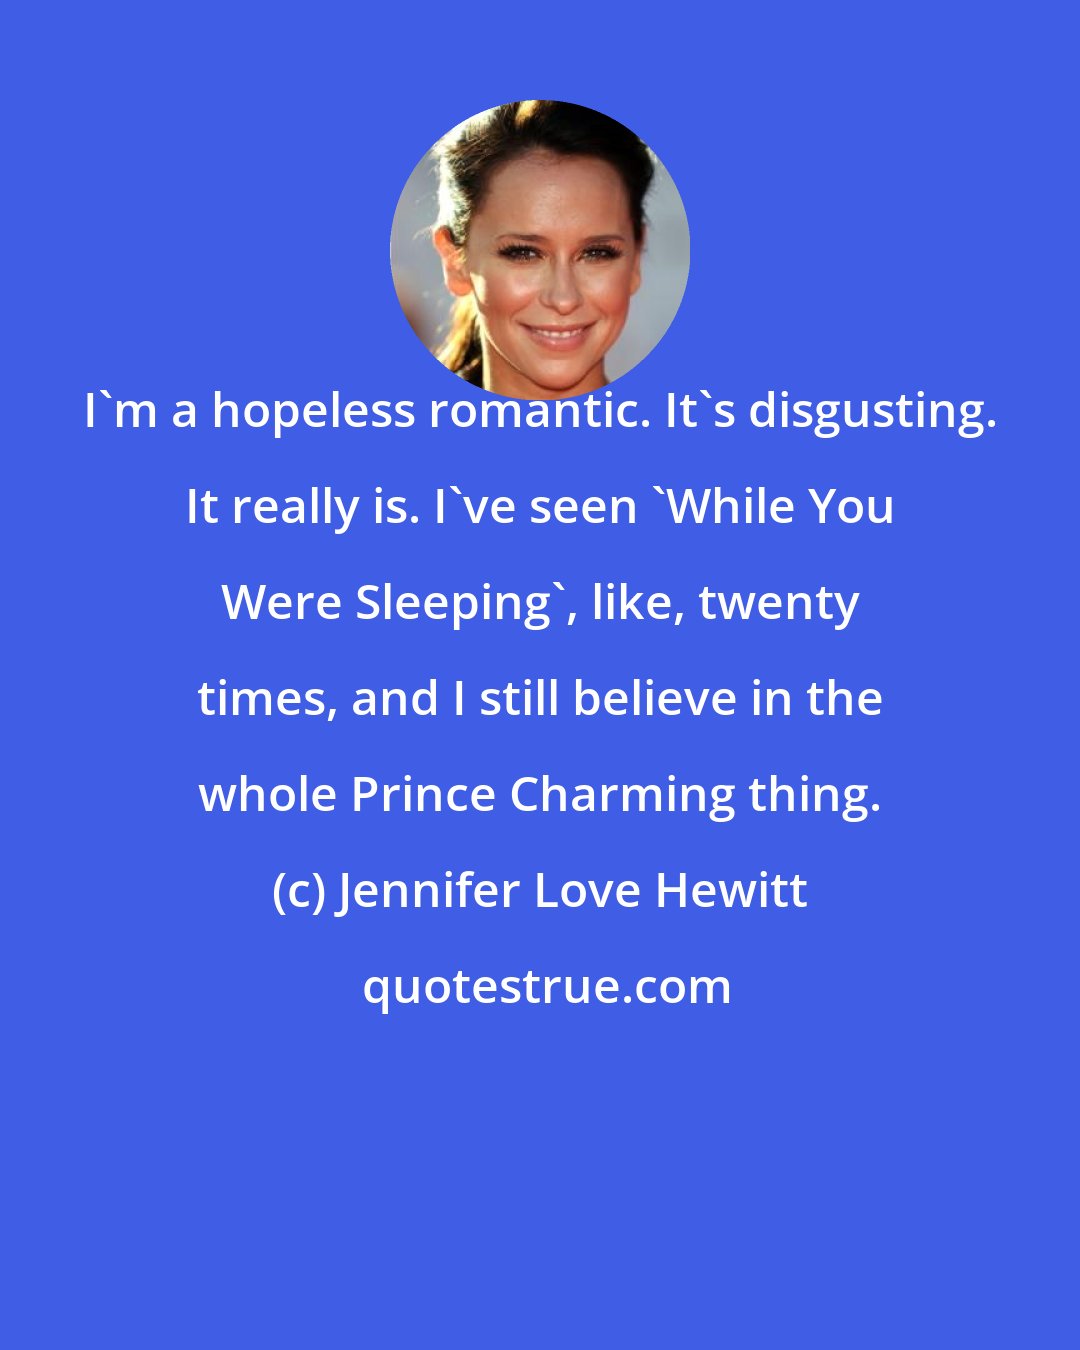 Jennifer Love Hewitt: I'm a hopeless romantic. It's disgusting. It really is. I've seen 'While You Were Sleeping', like, twenty times, and I still believe in the whole Prince Charming thing.